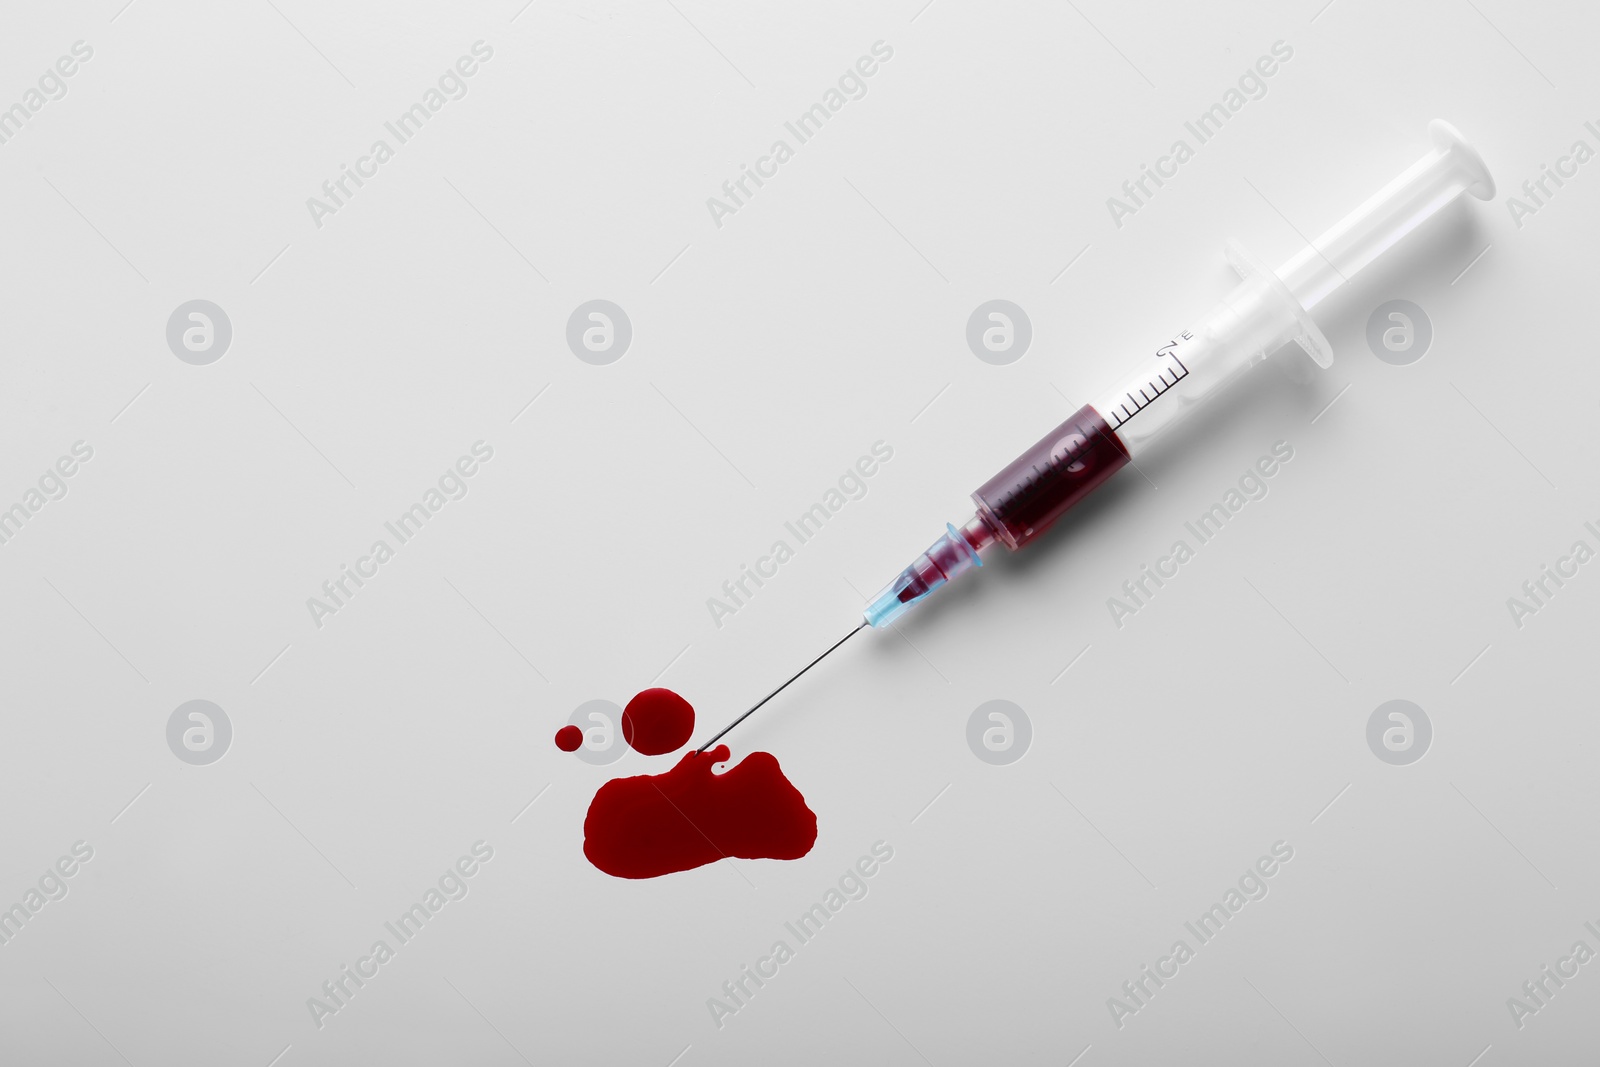 Photo of Plastic syringe with blood on white background, top view